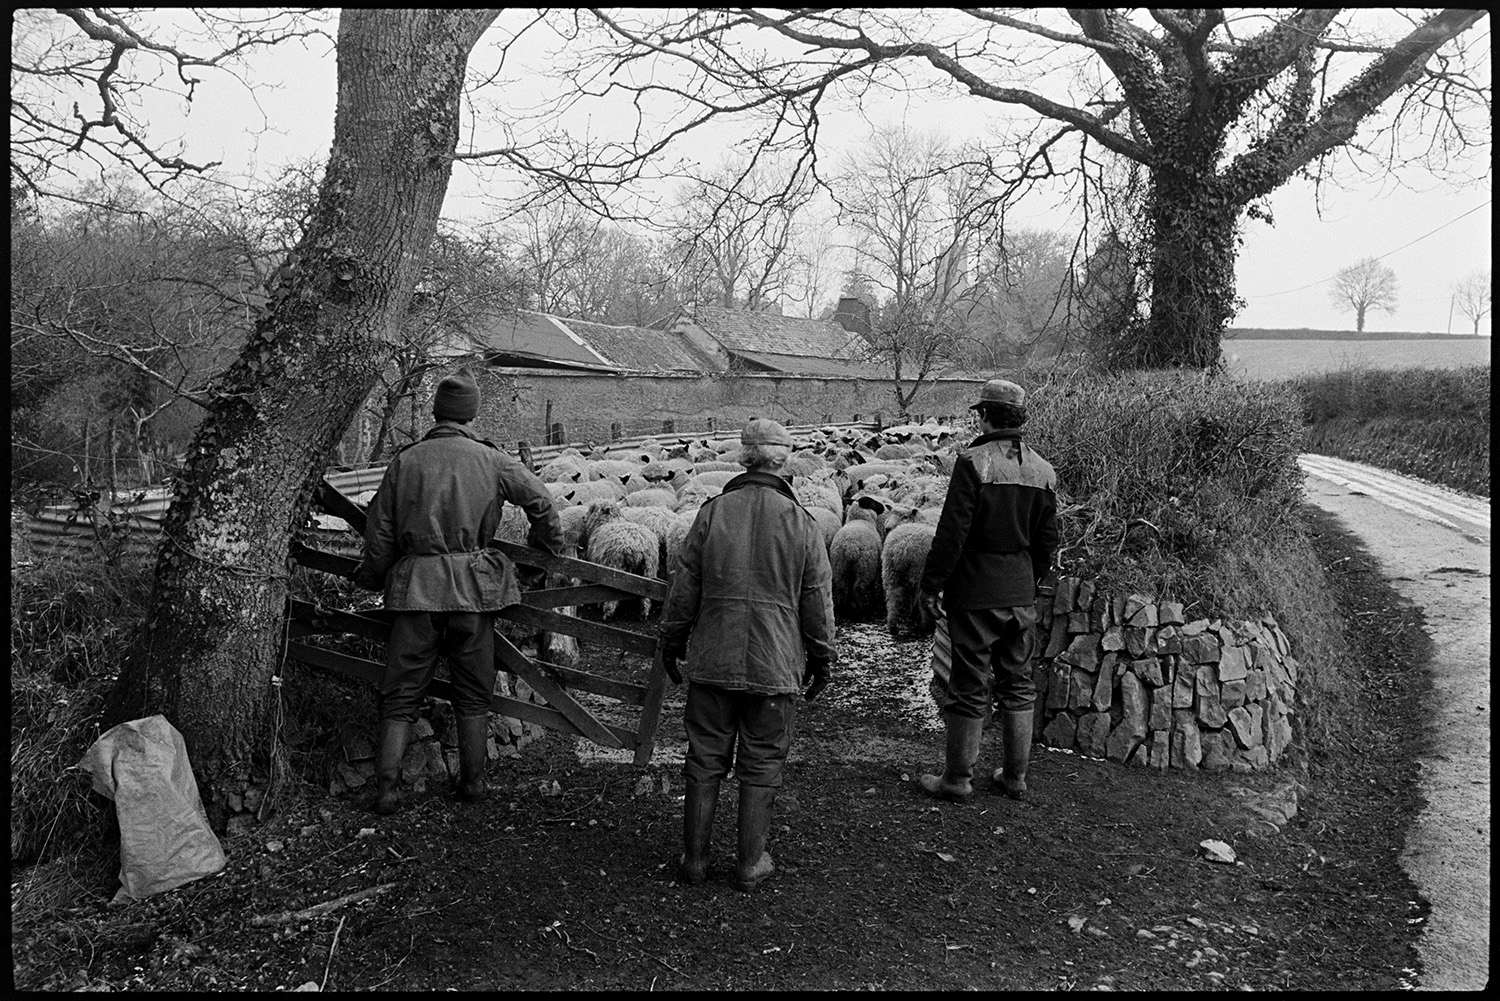 Farmers rounding up and checking sheep in pen. 
[Mr Banbury and two other men herding a flock of sheep into a corrugated iron pen in a field, from a road at Westpark, Iddesleigh. One man is holding a wooden gate to put across the entrance. The hedges at the entrance to the pen have dry stone walling at the bottom. Farm buildings can be seen in the background.]